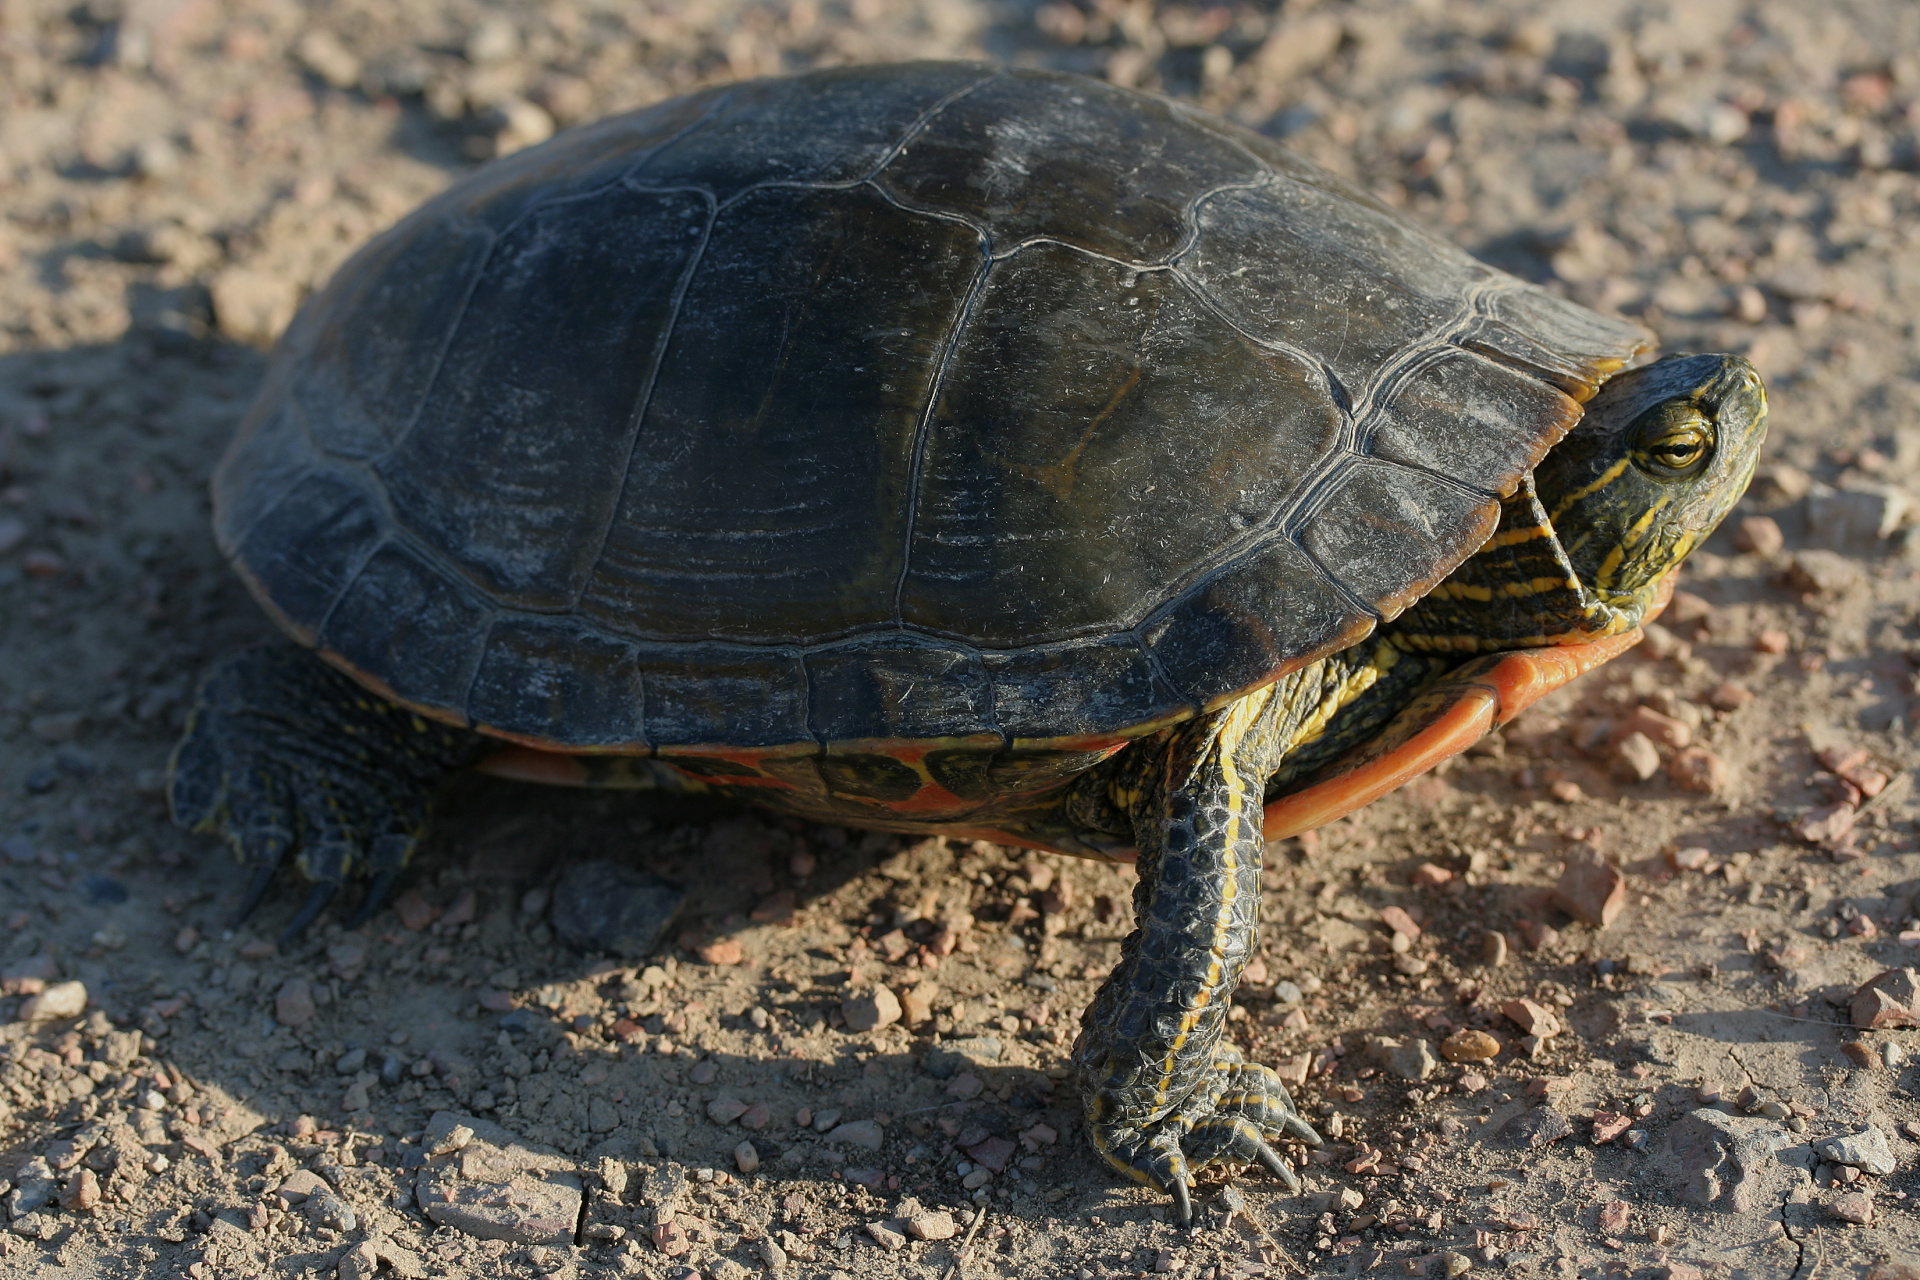 Chrysemys picta (Painted Turtle) (Travels » US Trip 1: Cheyenne Country » Animals)